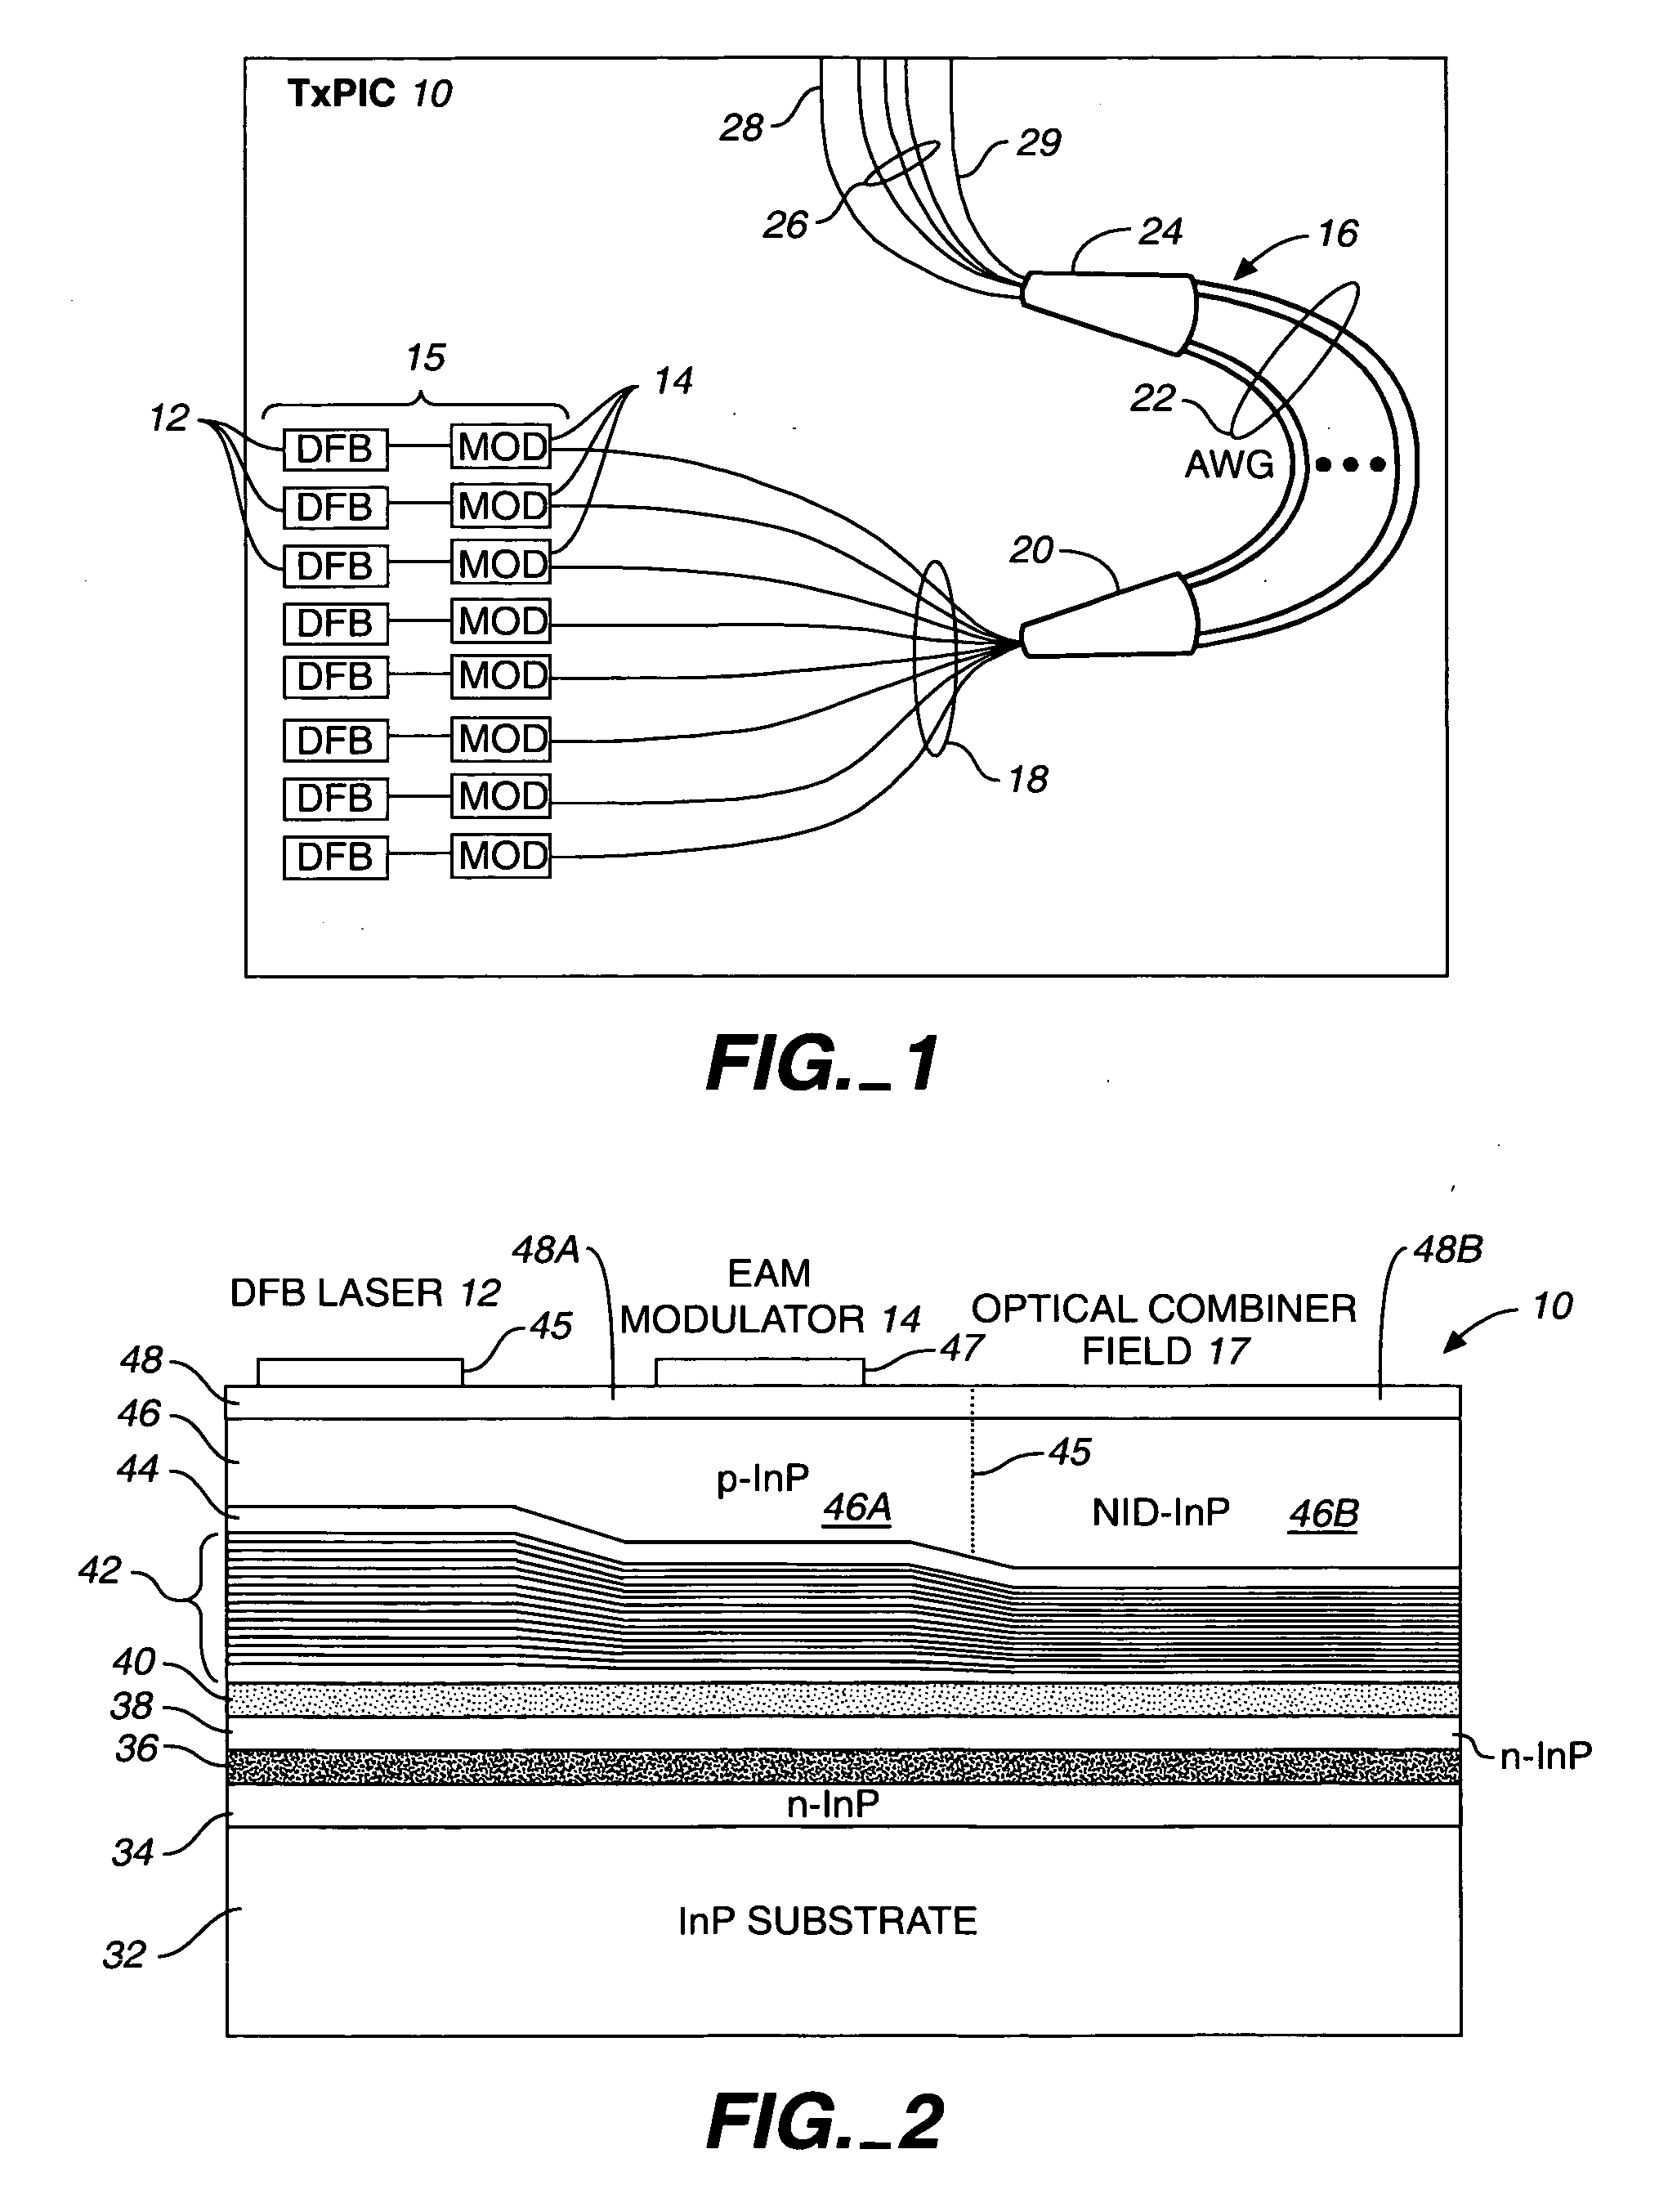 Optical communication module having at least one monolithic semiconductor photonic integrated circuit chip